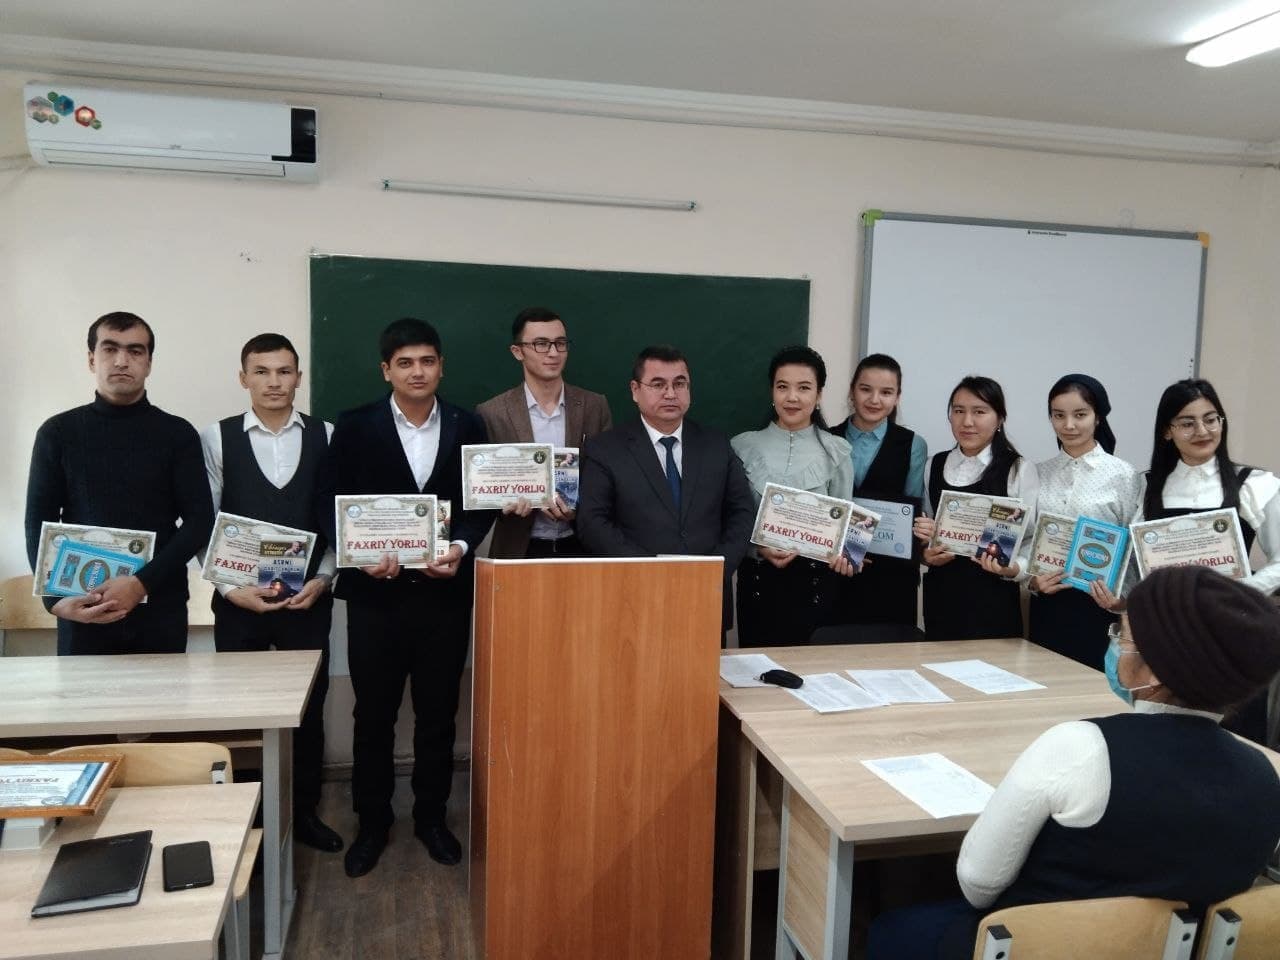 Talented students of the Faculty of Philology are the winners of the Enlightenment competition